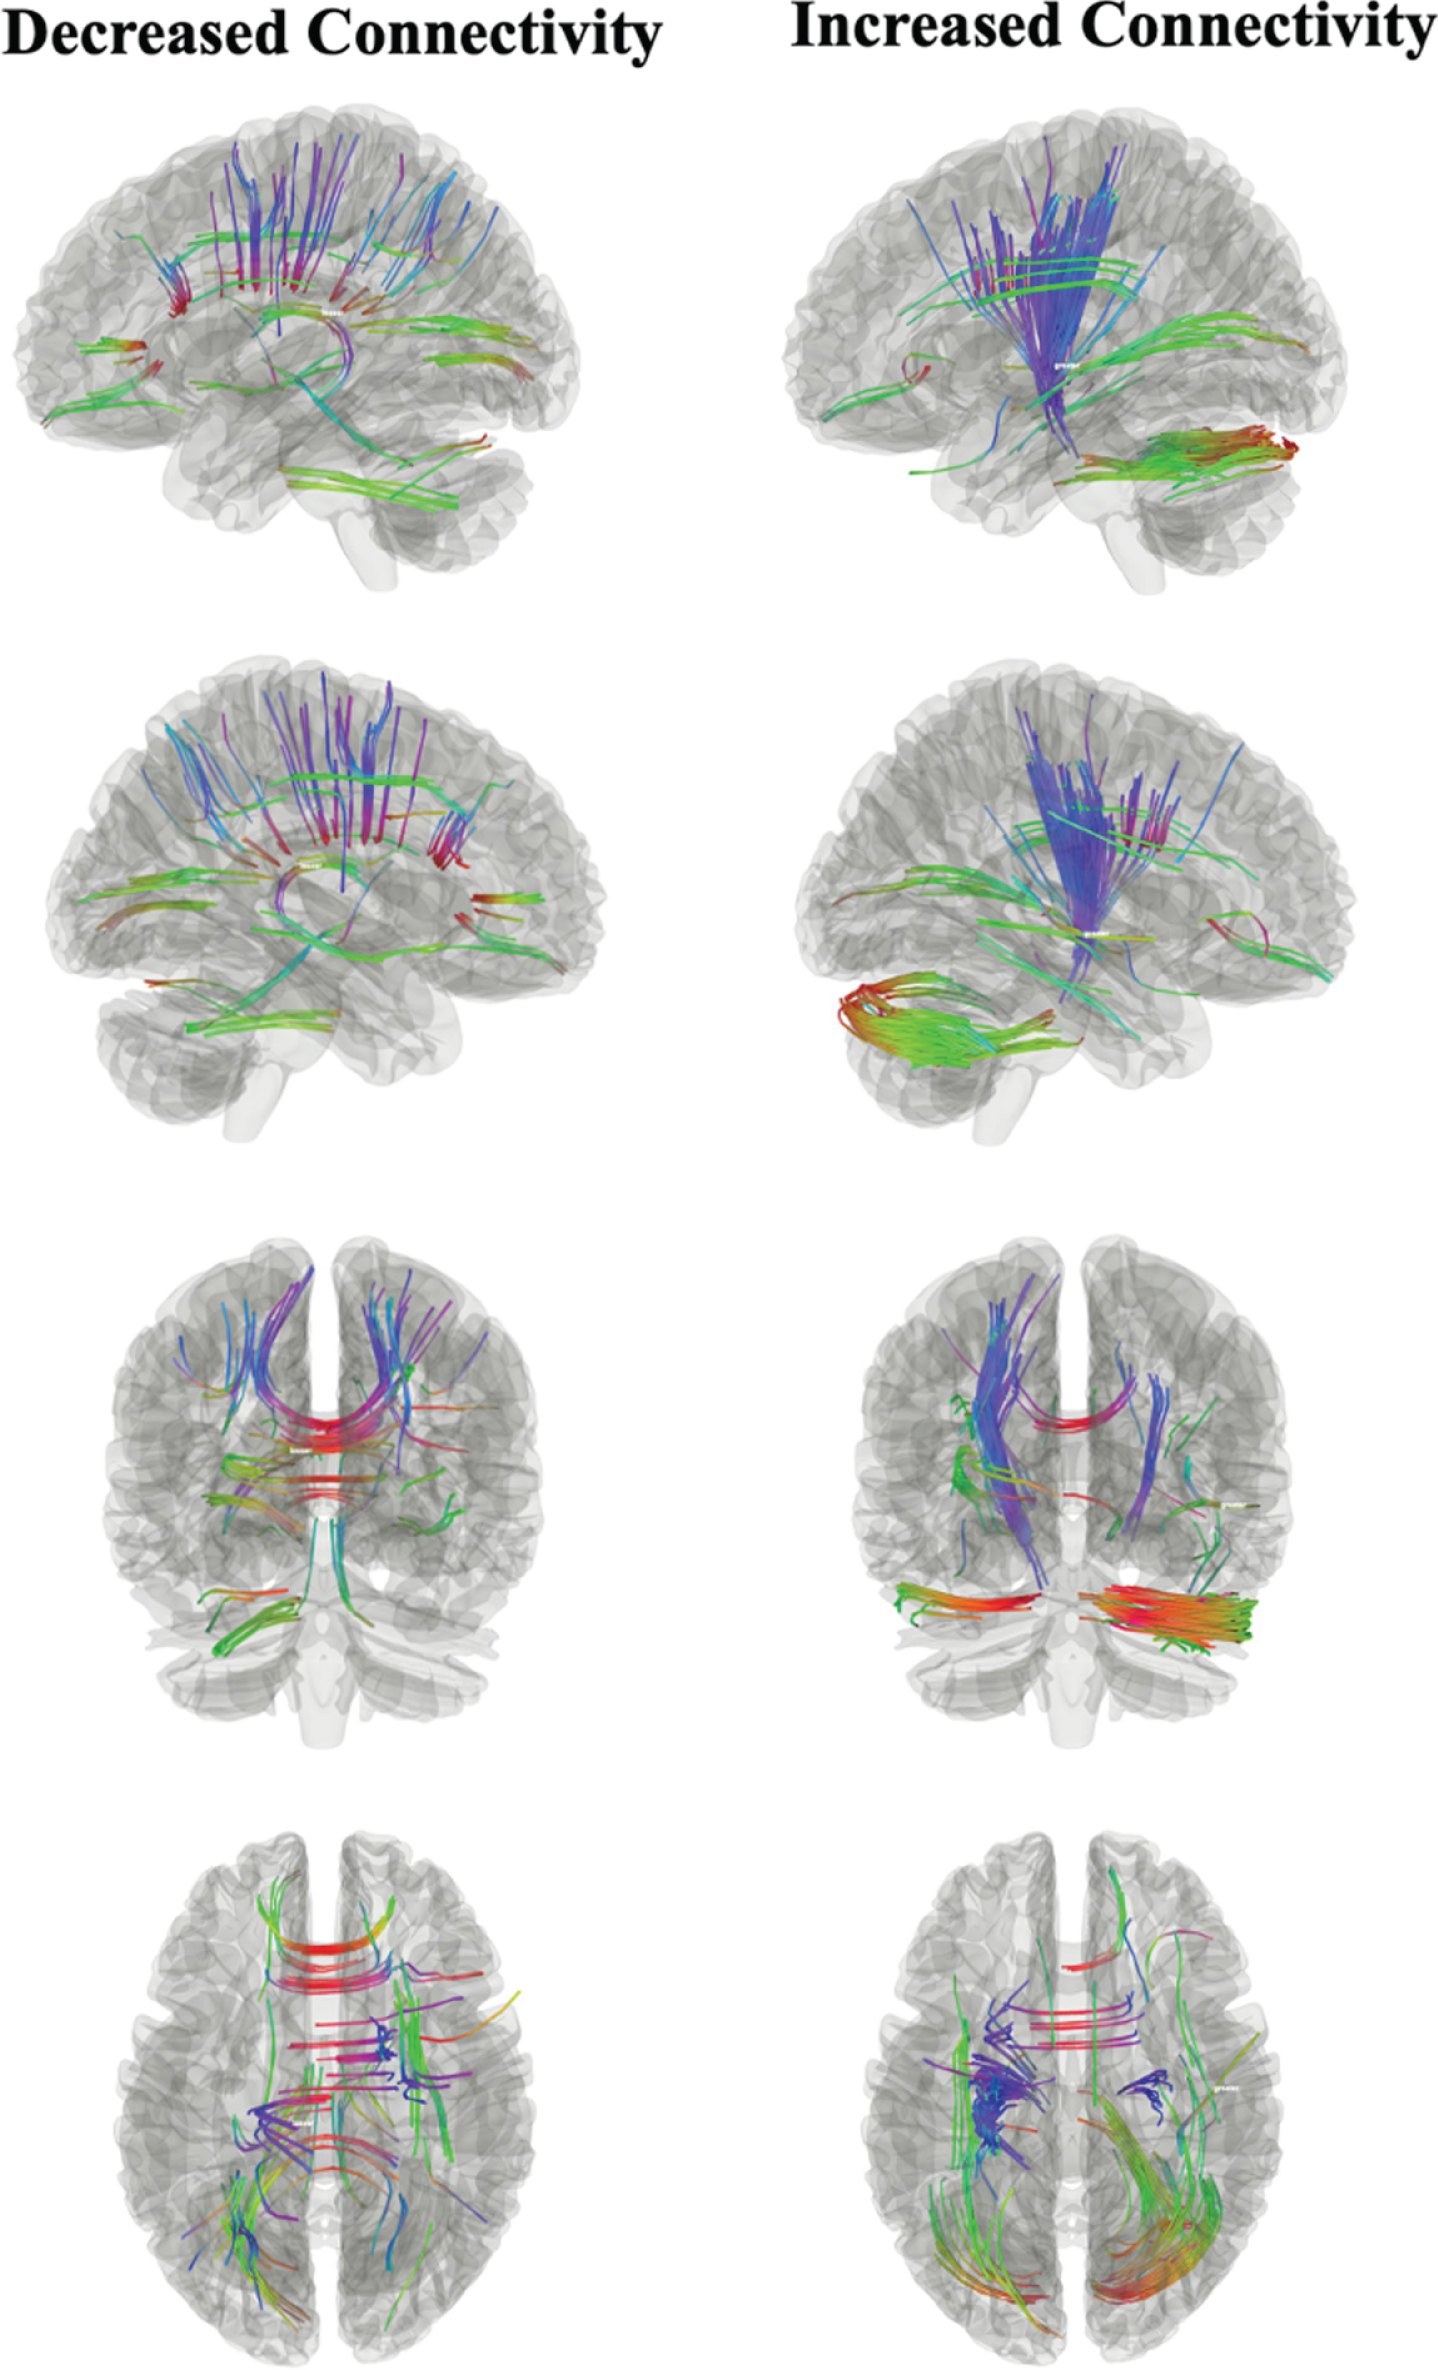 Connectometry analysis examining associations between incident MCI and white matter connectivity. Decreased connectivity (left) was found in the corpus callosum, corticothalamic pathways and cortico-striatal pathway. Increased connectivity (right) was also found in the corticothalamic pathway and cortico-striatal pathway.